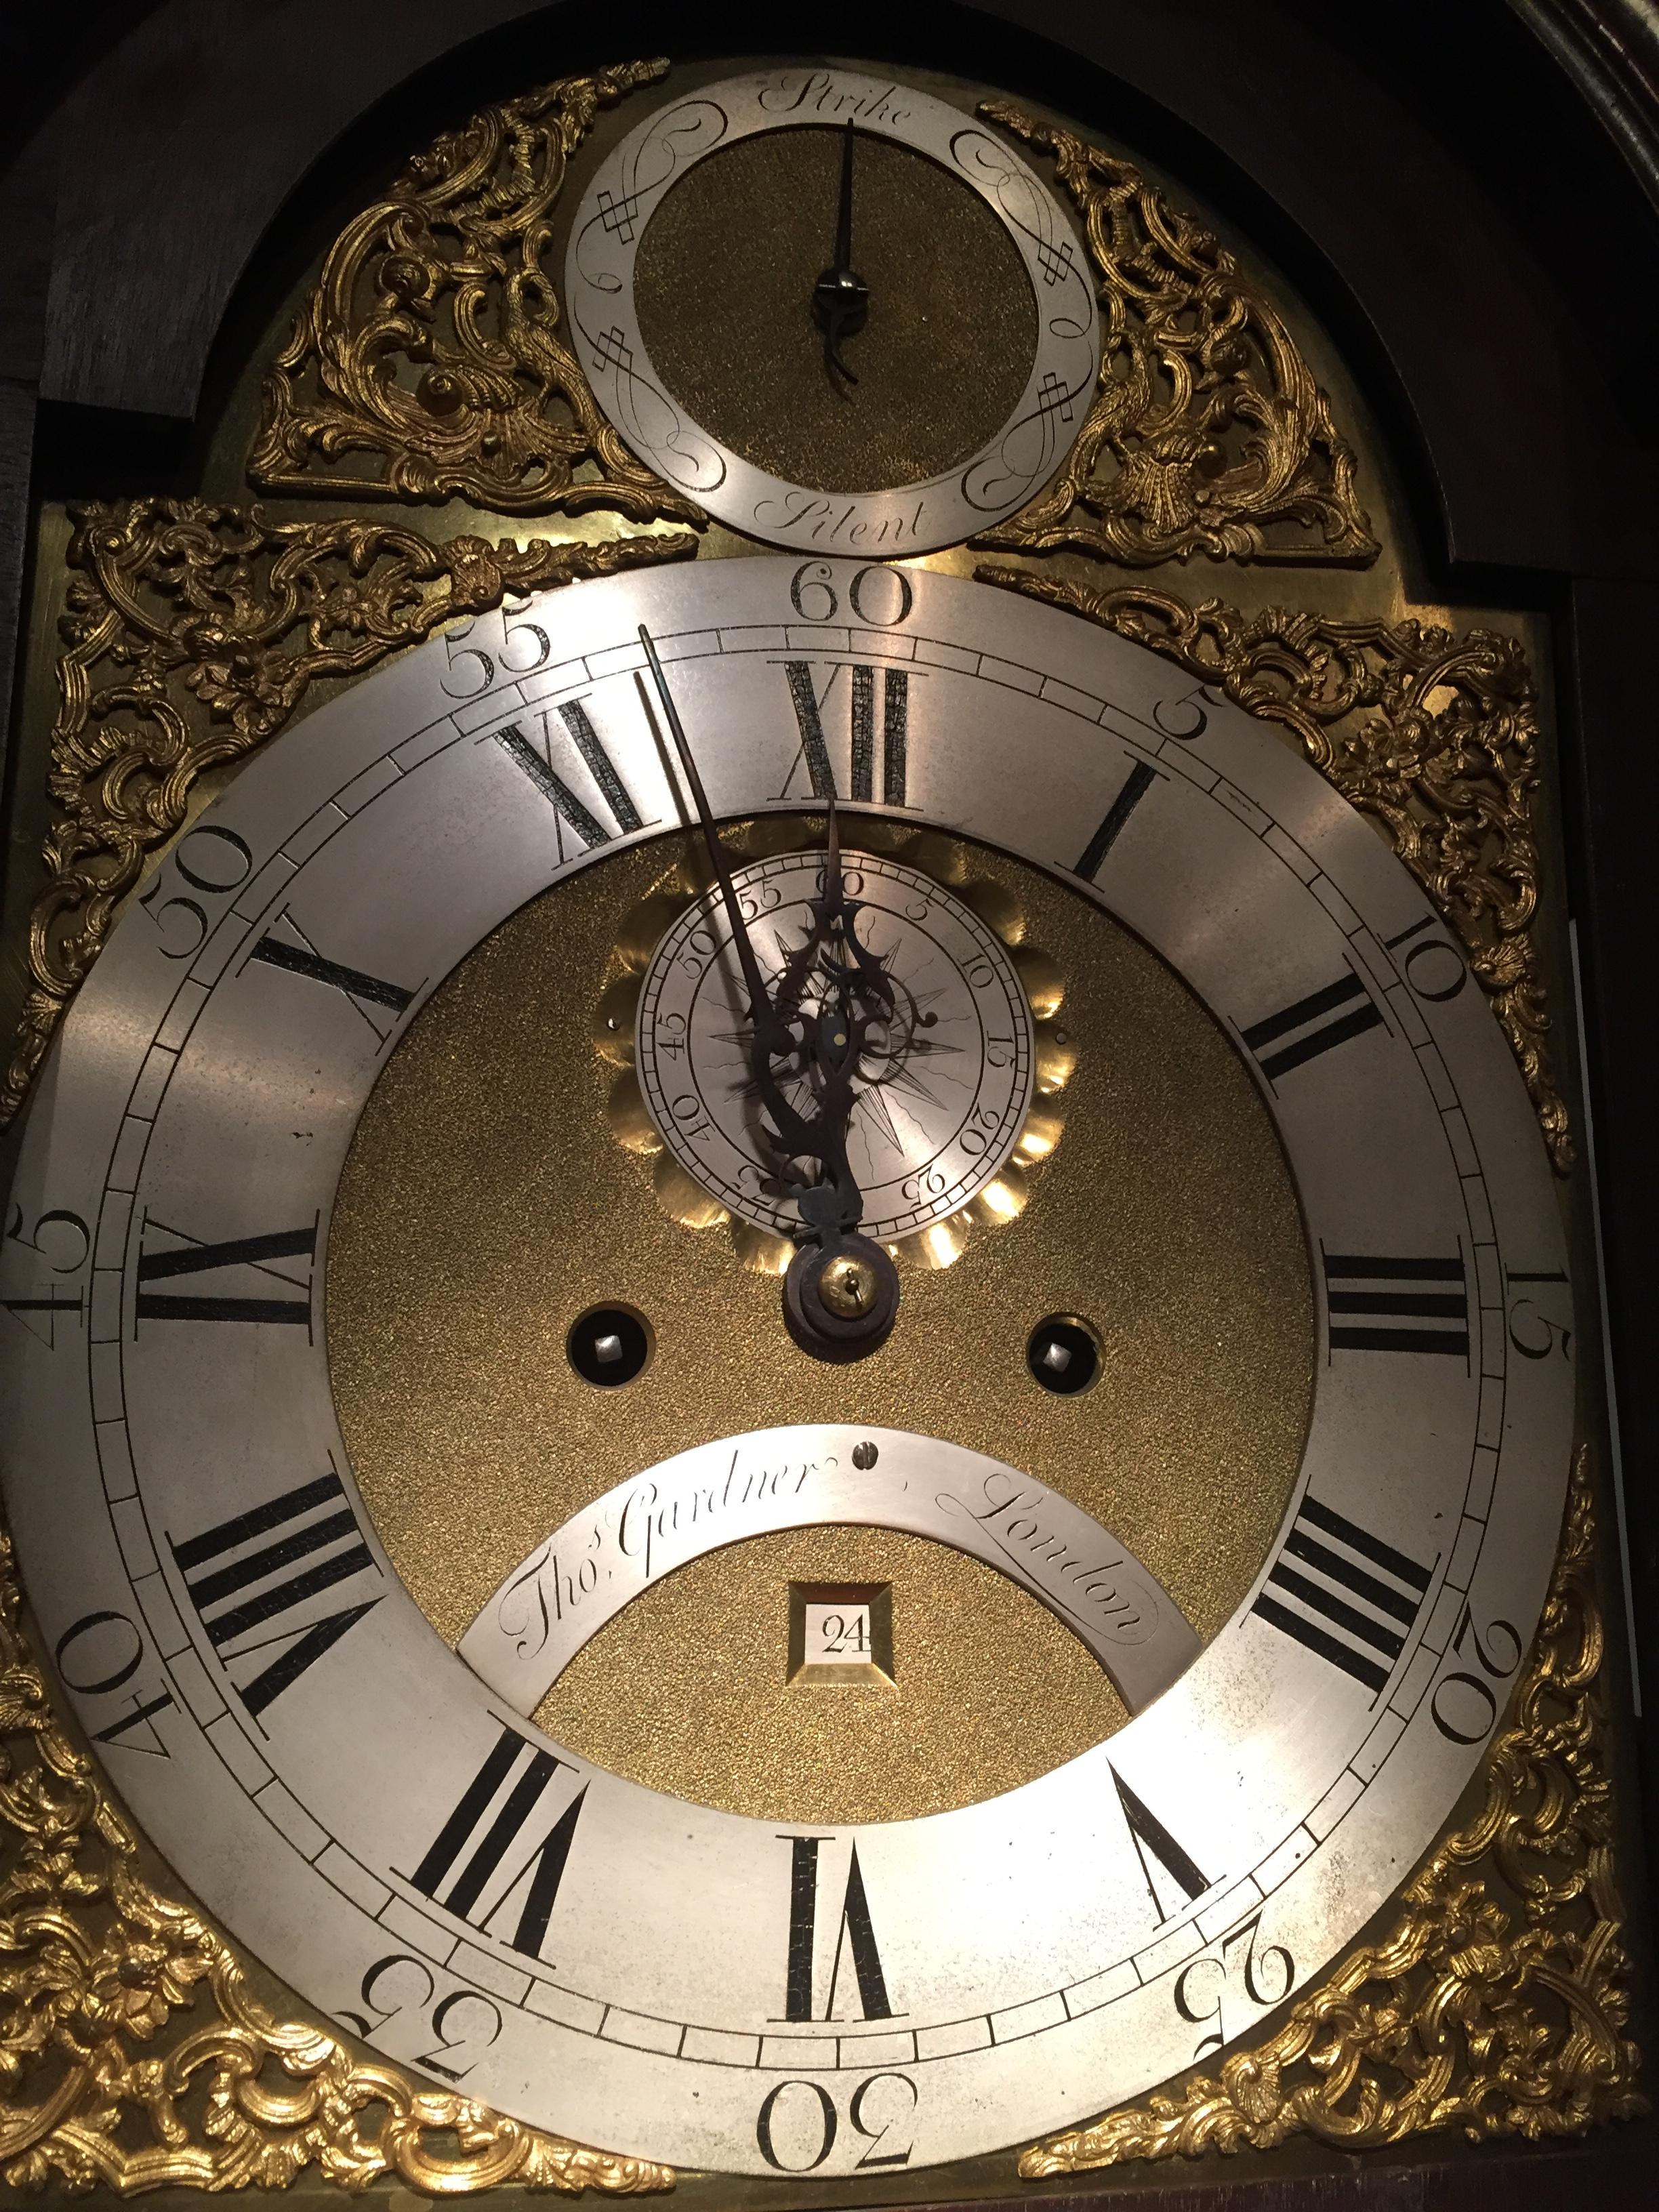 A fine antique George III period mahogany eight day longcase clock with figured mahogany case. The hood with brass capped corner columns, arched top with 3 brass spire finials, interspersed by a scalloped edge decoration.

The arched brass dial is